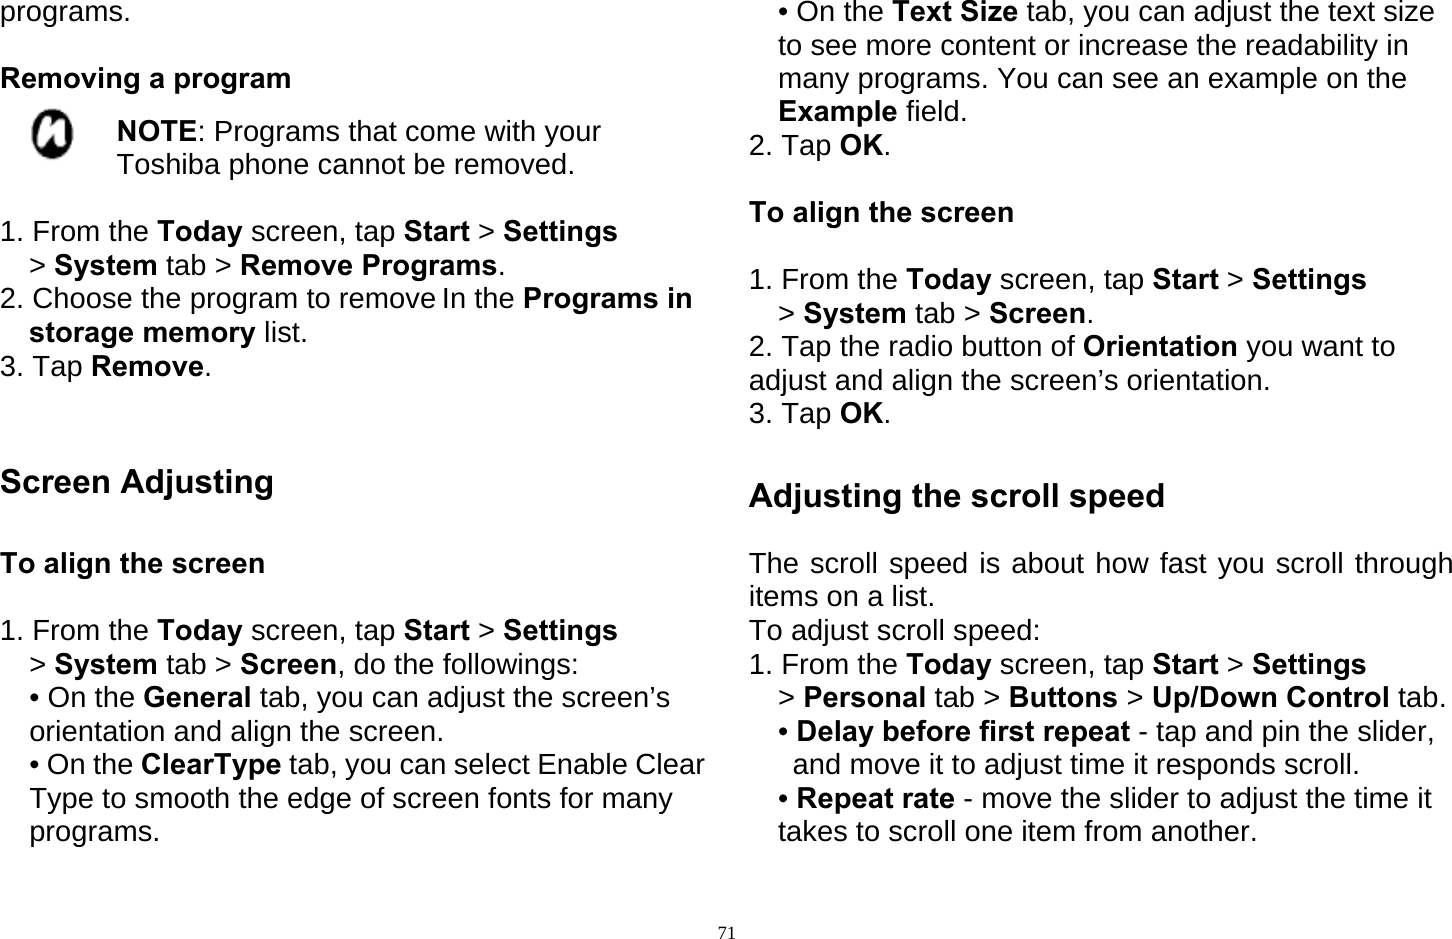   71programs.  Removing a program  NOTE: Programs that come with your Toshiba phone cannot be removed.  1. From the Today screen, tap Start &gt; Settings &gt; System tab &gt; Remove Programs. 2. Choose the program to remove In the Programs in storage memory list. 3. Tap Remove.   Screen Adjusting  To align the screen  1. From the Today screen, tap Start &gt; Settings &gt; System tab &gt; Screen, do the followings: • On the General tab, you can adjust the screen’s orientation and align the screen. • On the ClearType tab, you can select Enable Clear Type to smooth the edge of screen fonts for many programs. • On the Text Size tab, you can adjust the text size to see more content or increase the readability in many programs. You can see an example on the Example field. 2. Tap OK.  To align the screen  1. From the Today screen, tap Start &gt; Settings &gt; System tab &gt; Screen. 2. Tap the radio button of Orientation you want to adjust and align the screen’s orientation. 3. Tap OK.  Adjusting the scroll speed  The scroll speed is about how fast you scroll through items on a list. To adjust scroll speed: 1. From the Today screen, tap Start &gt; Settings &gt; Personal tab &gt; Buttons &gt; Up/Down Control tab.  • Delay before first repeat - tap and pin the slider, and move it to adjust time it responds scroll. • Repeat rate - move the slider to adjust the time it takes to scroll one item from another. 